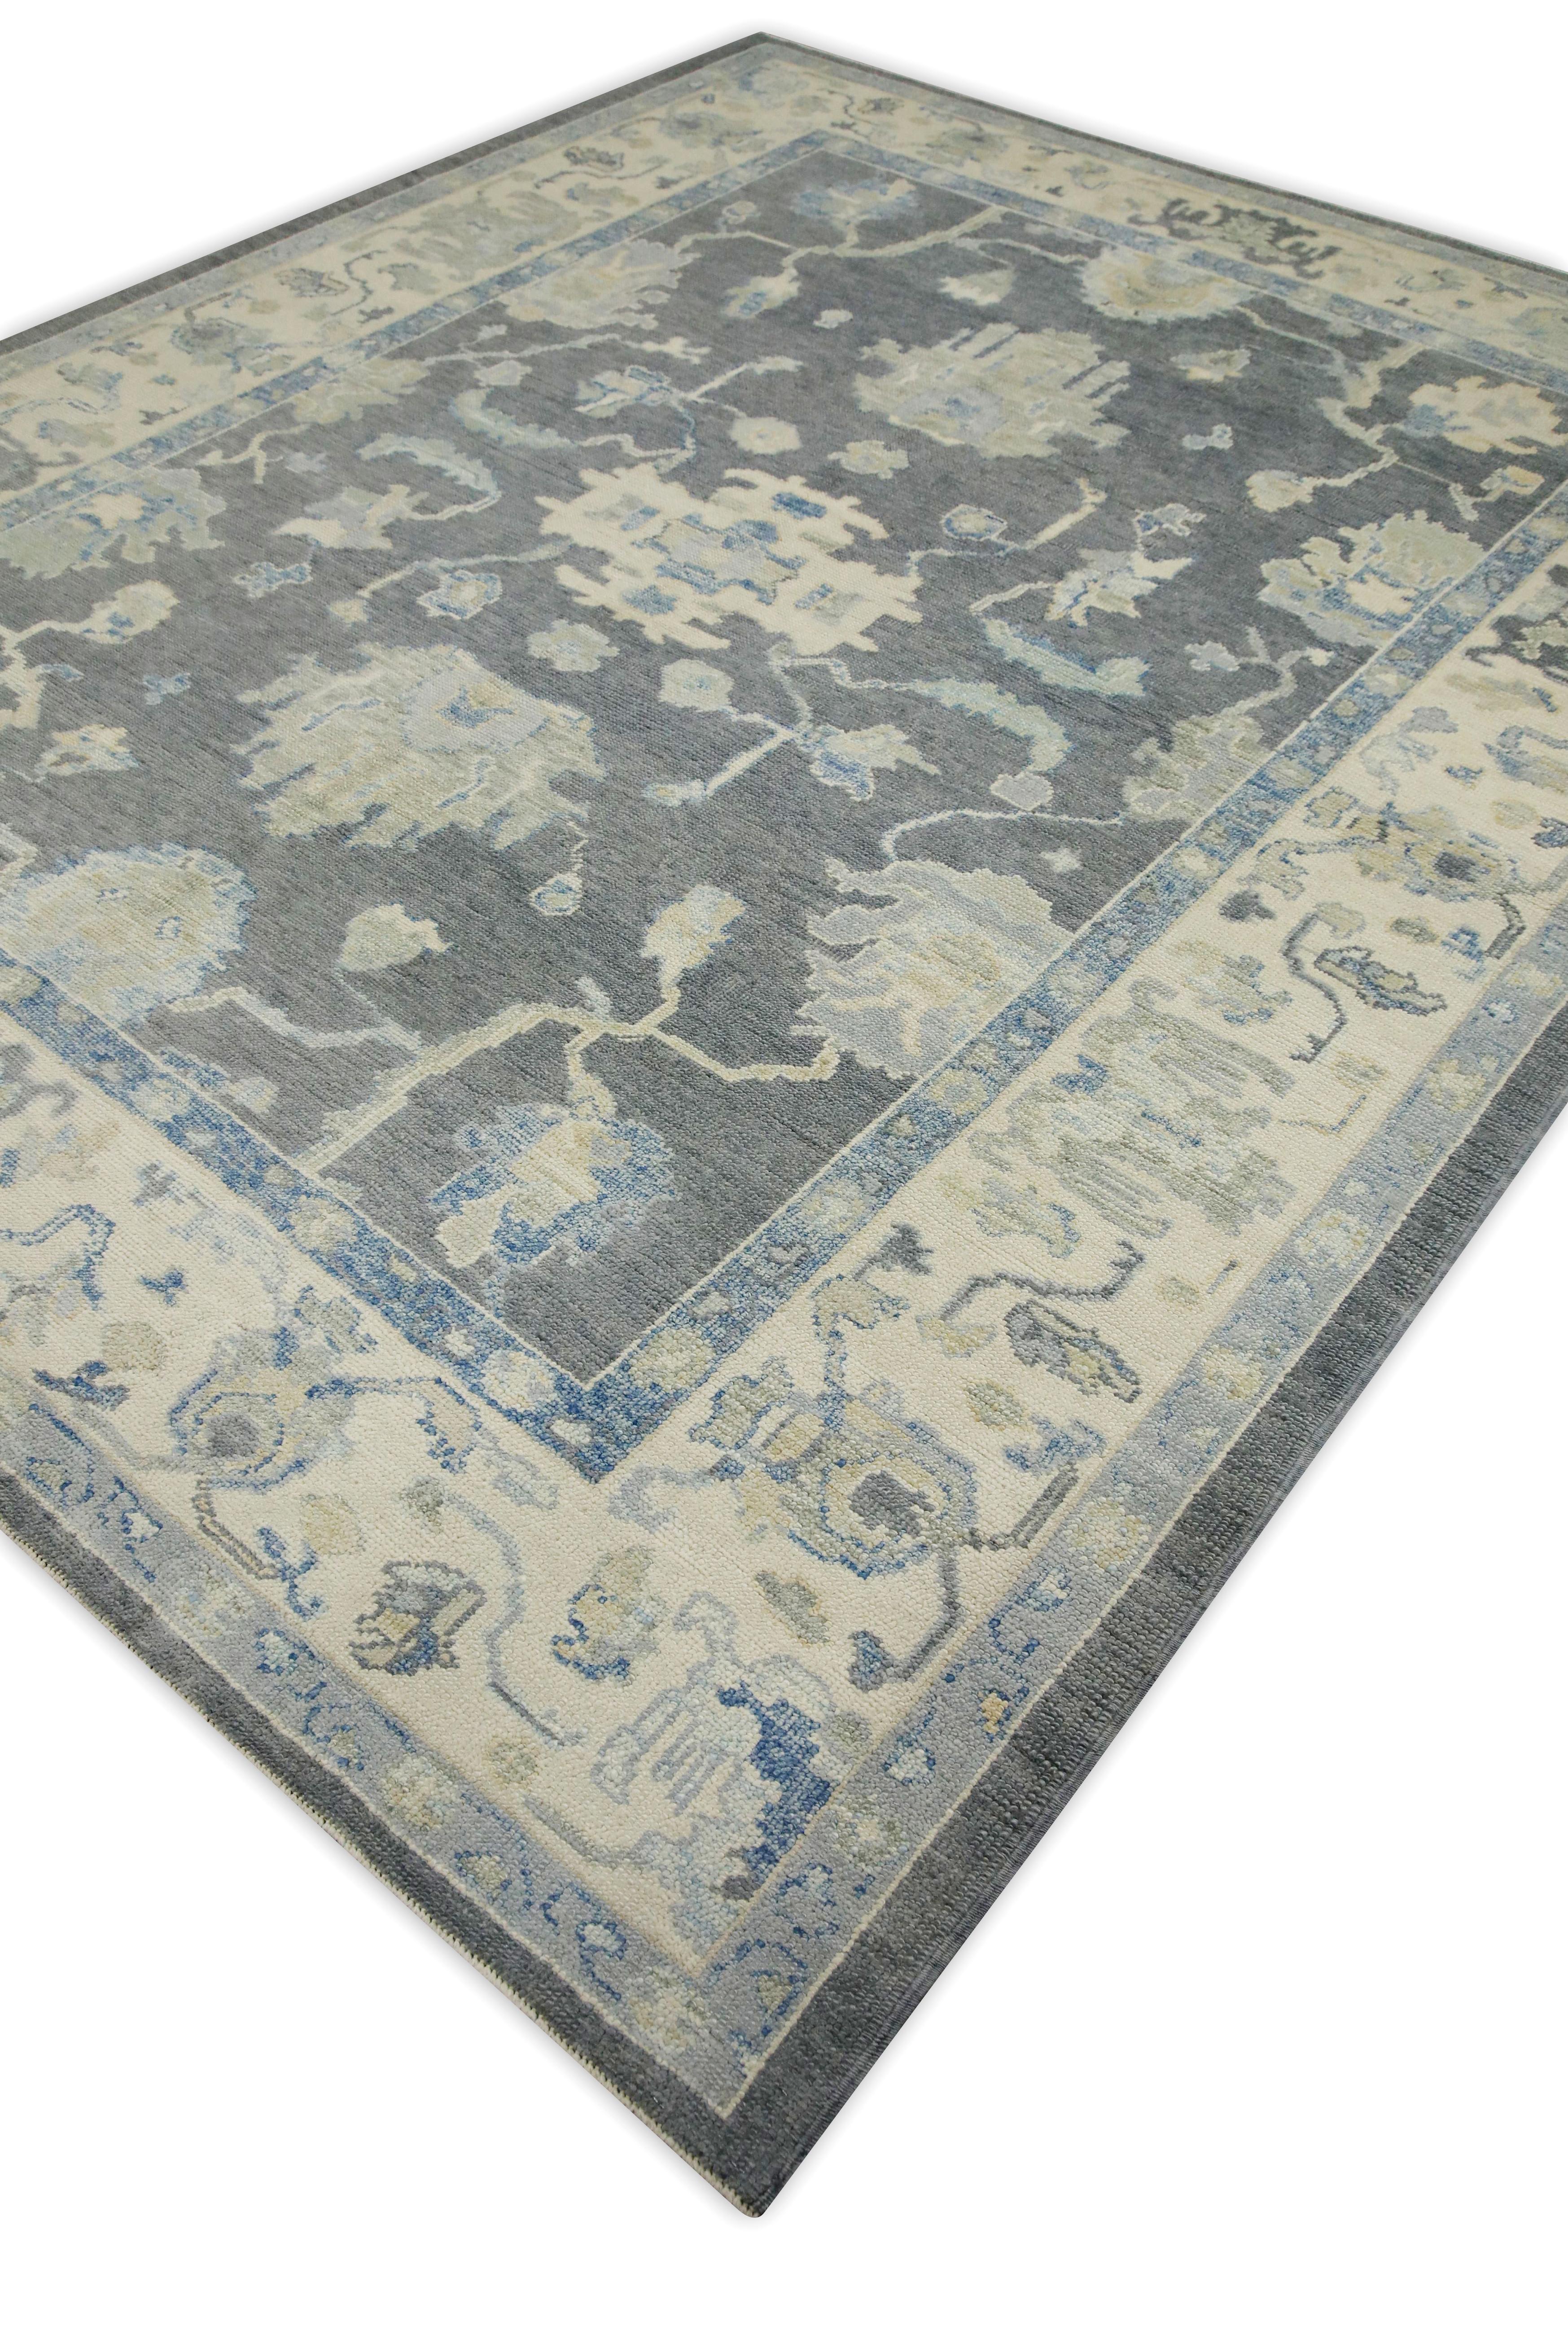 Contemporary Gray & Blue Floral Design Handwoven Wool Turkish Oushak Rug 8'4